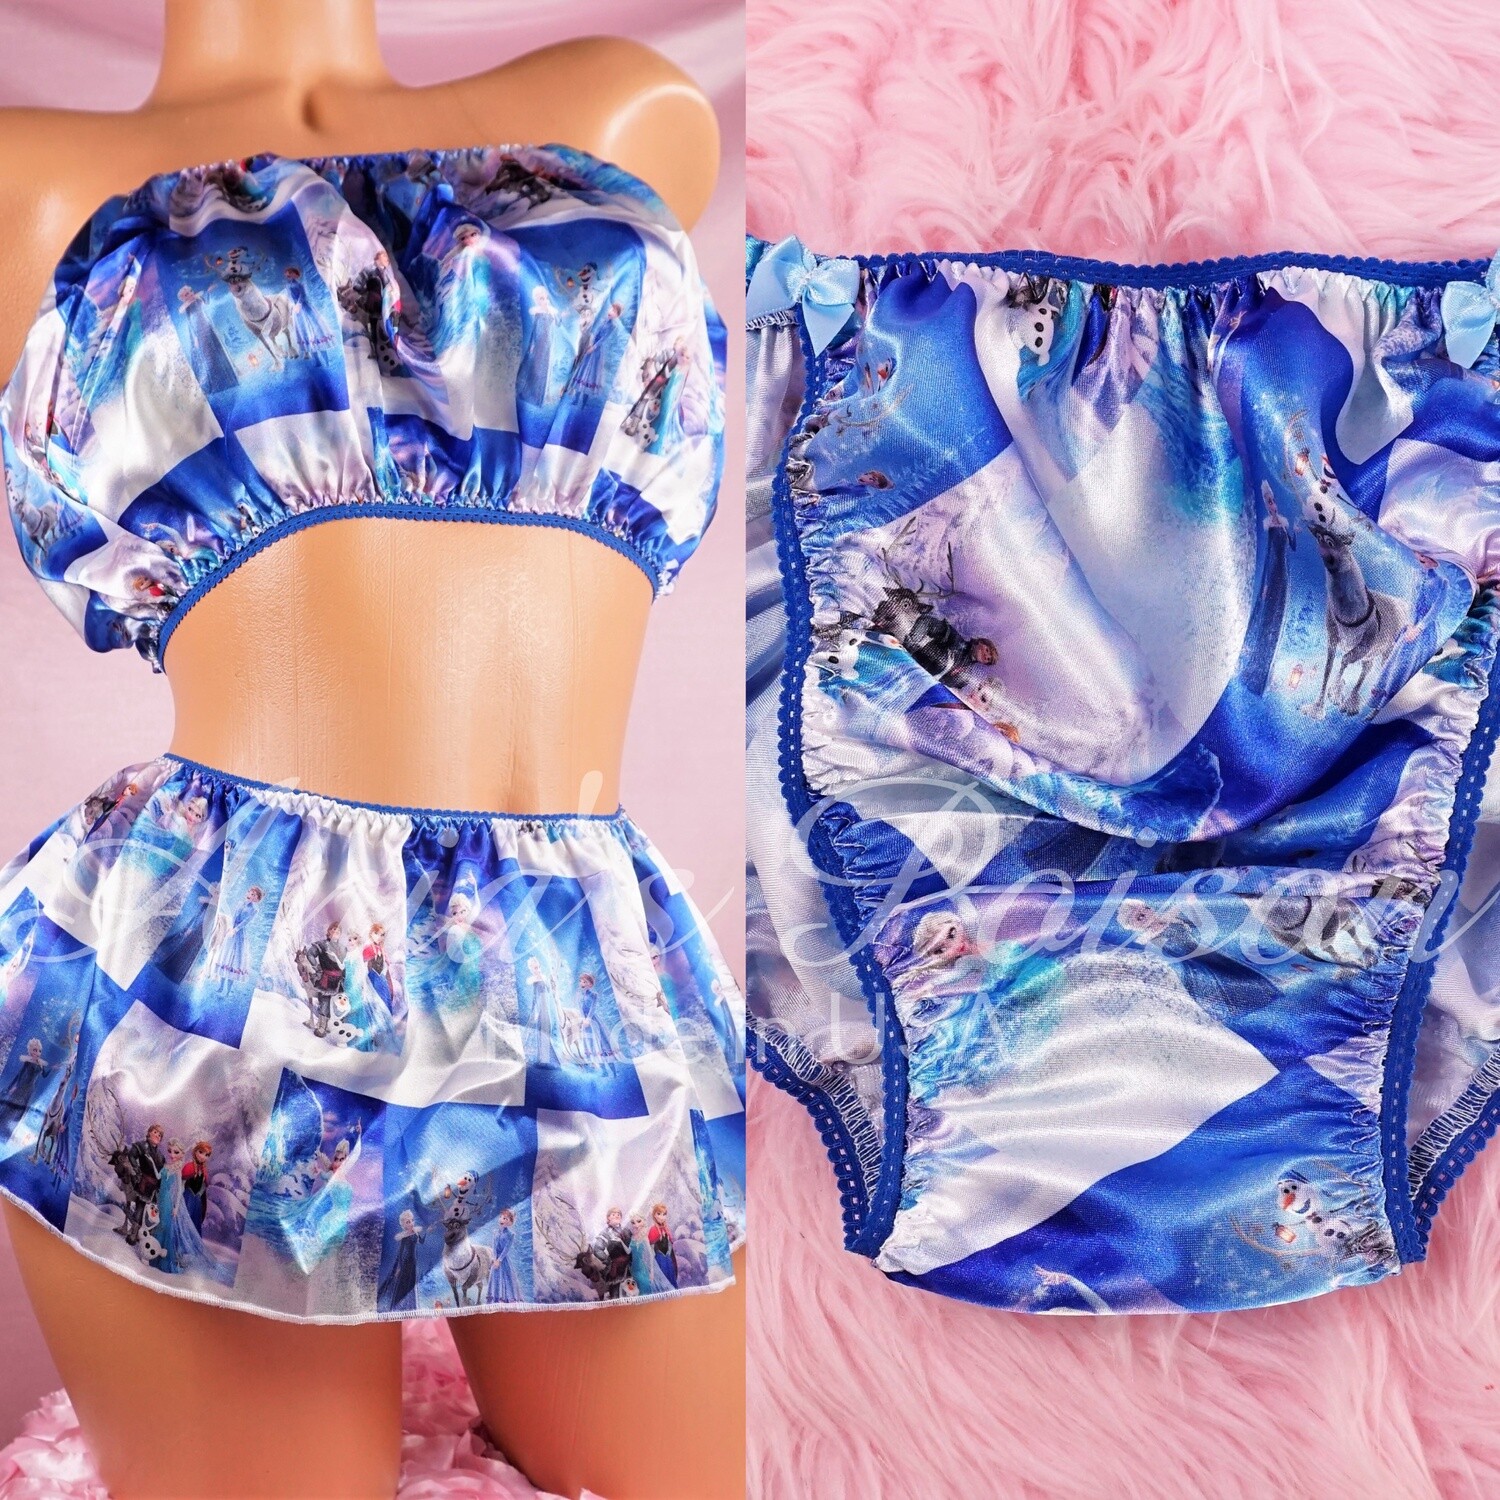 Ania's Poison Christmas Winter Ice Queen Panties 100% polyester silky soft blue string bikini sissy mens underwear character print panties or bra skirt set